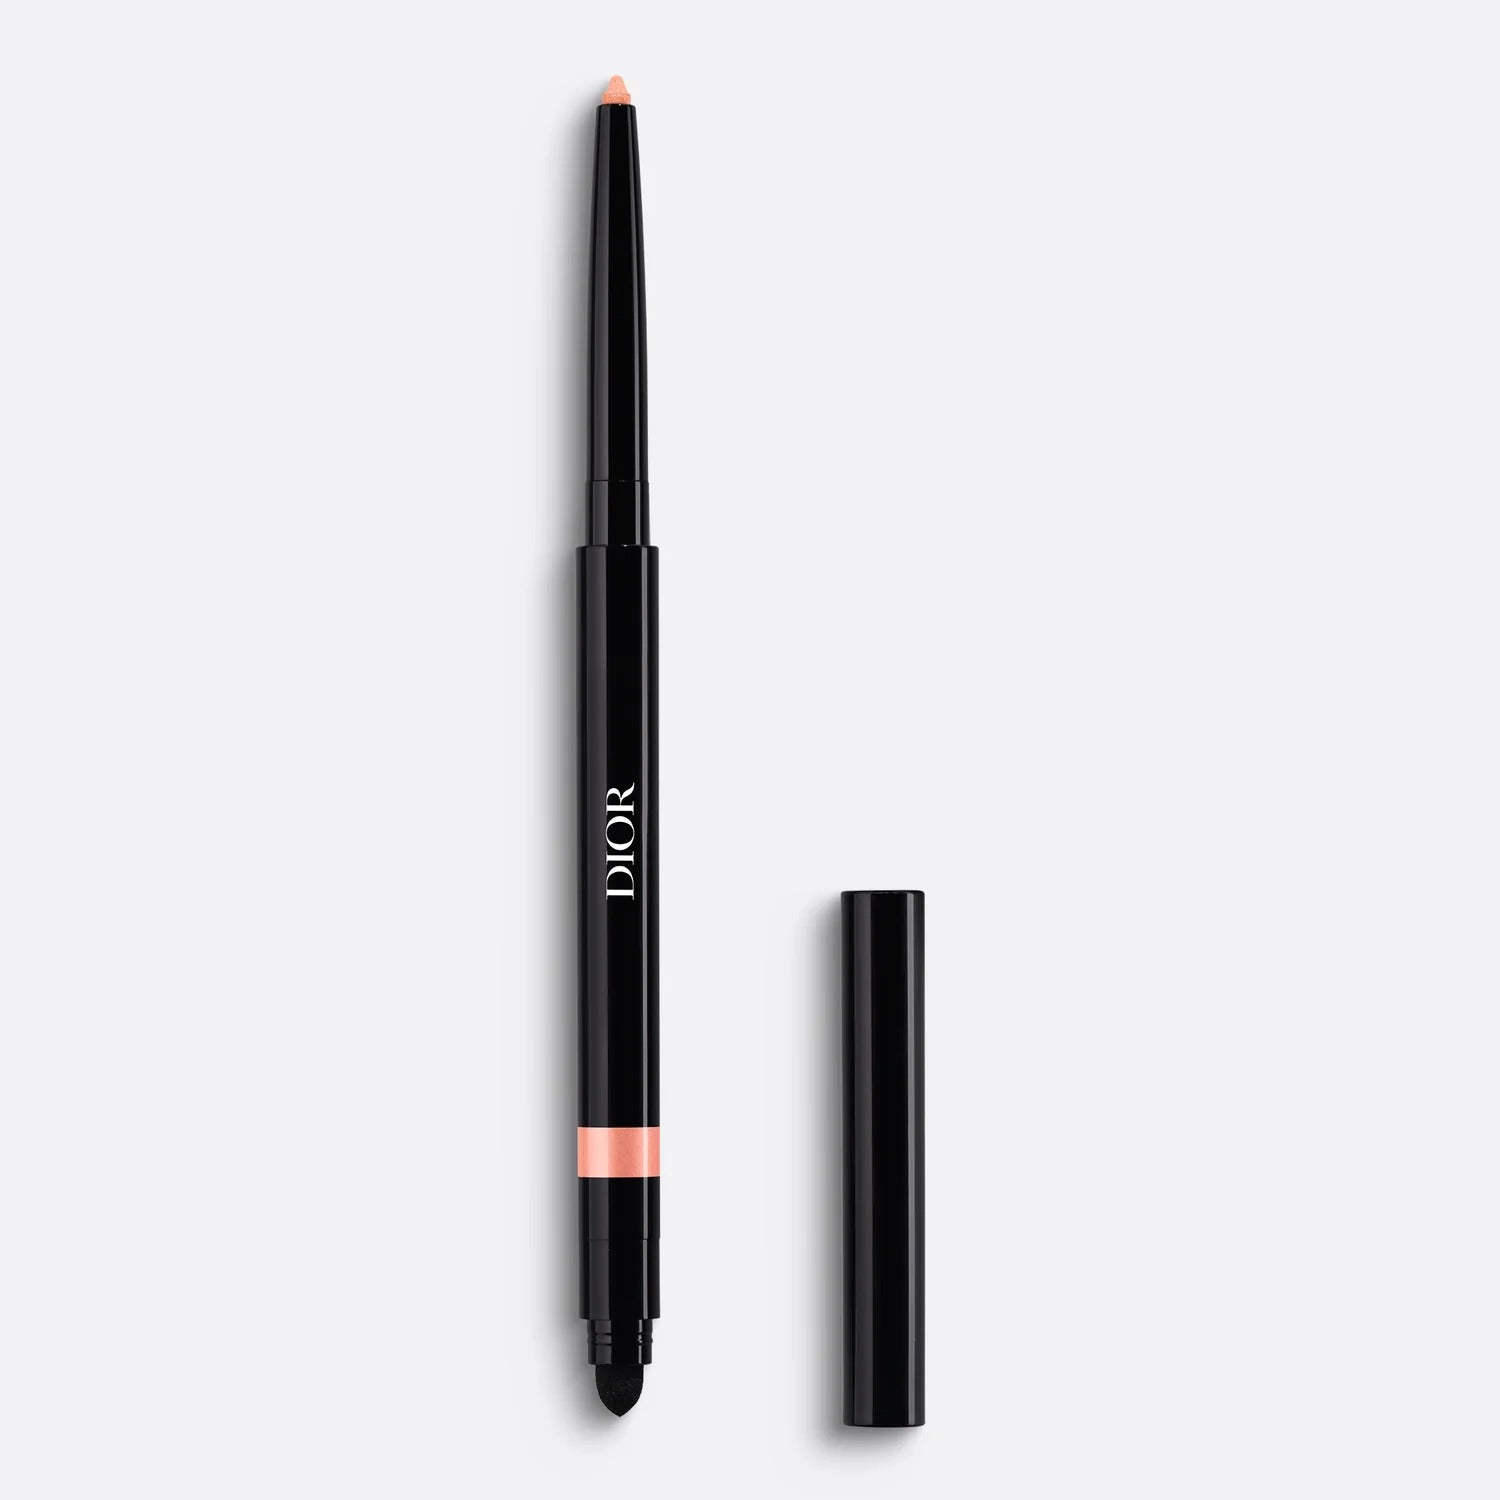 Bút Kẻ Mắt Dior Diorshow Stylo #646 Pearly Coral